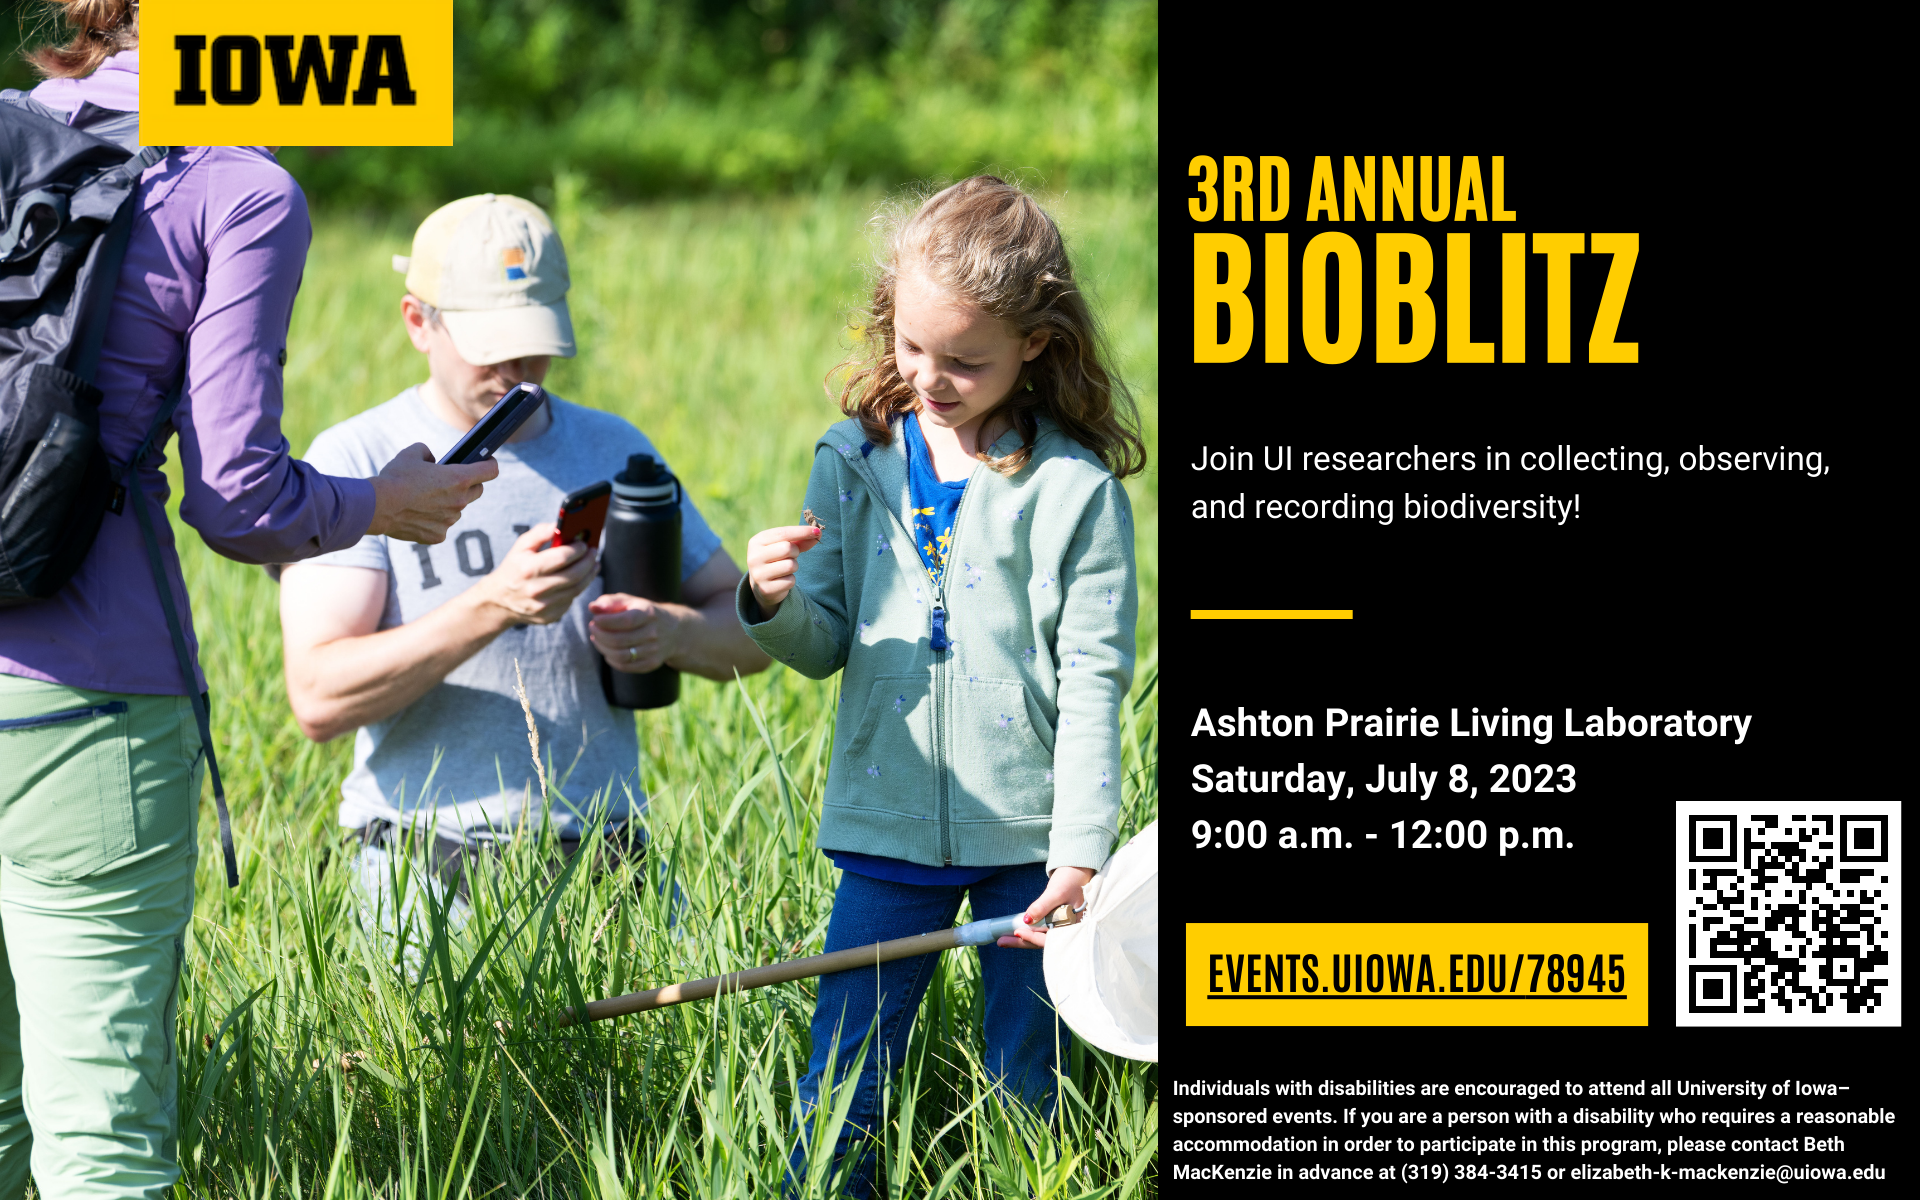 3rd Annual BioBlitz at the Ashton Prairie Living Laboratory on Saturday, July 8 from 9am-12pm